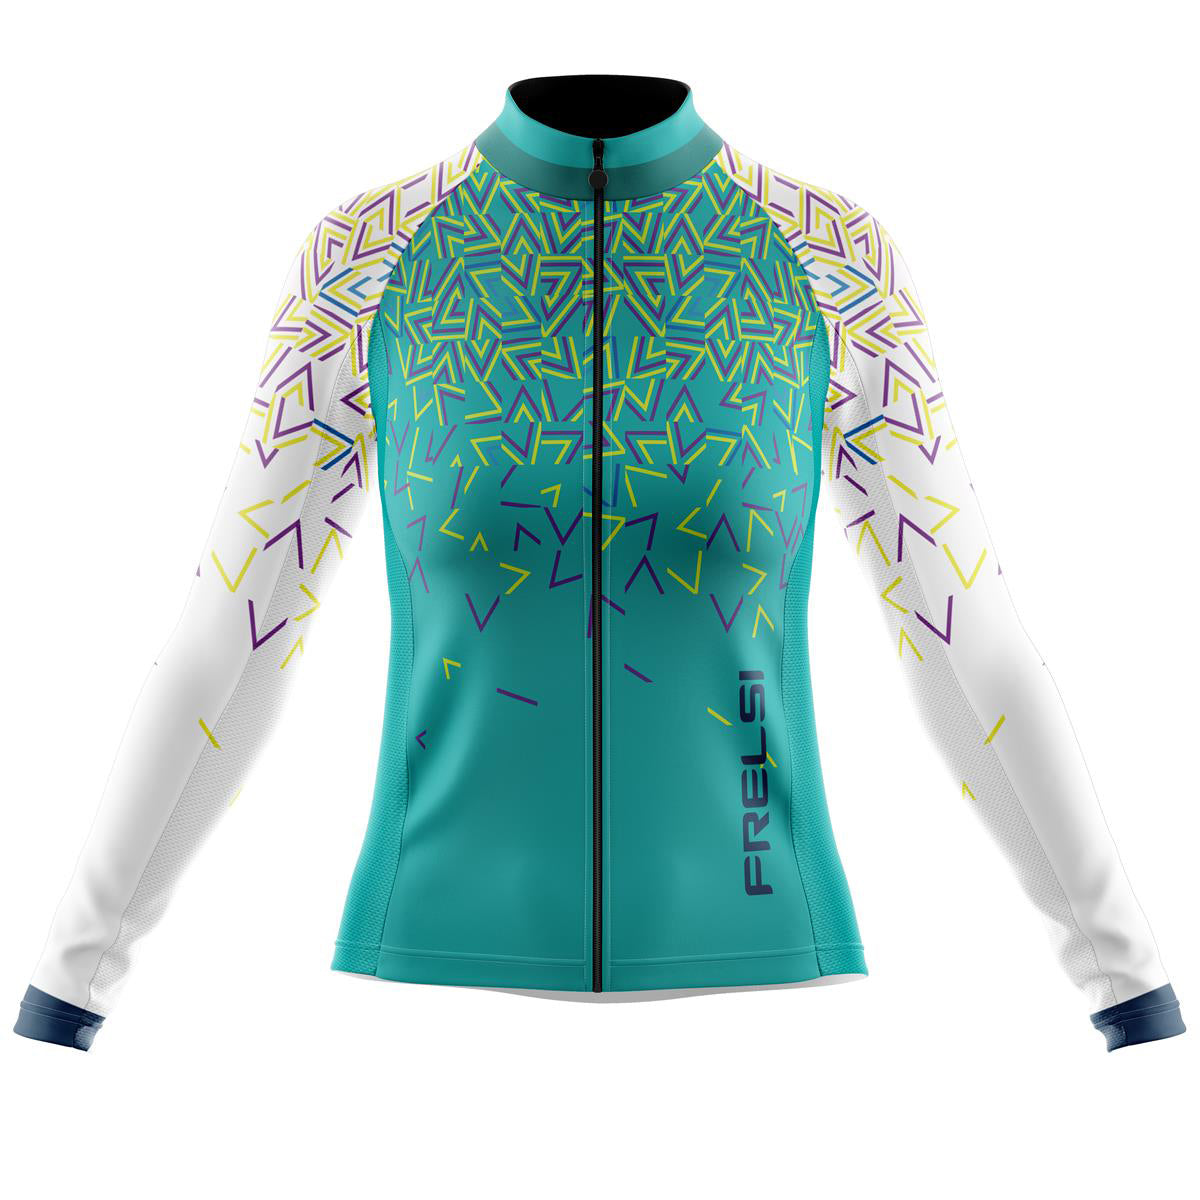 The Wind Sprint cycling jersey for women, featuring a breathable and moisture-wicking fabric and a relaxed fit.